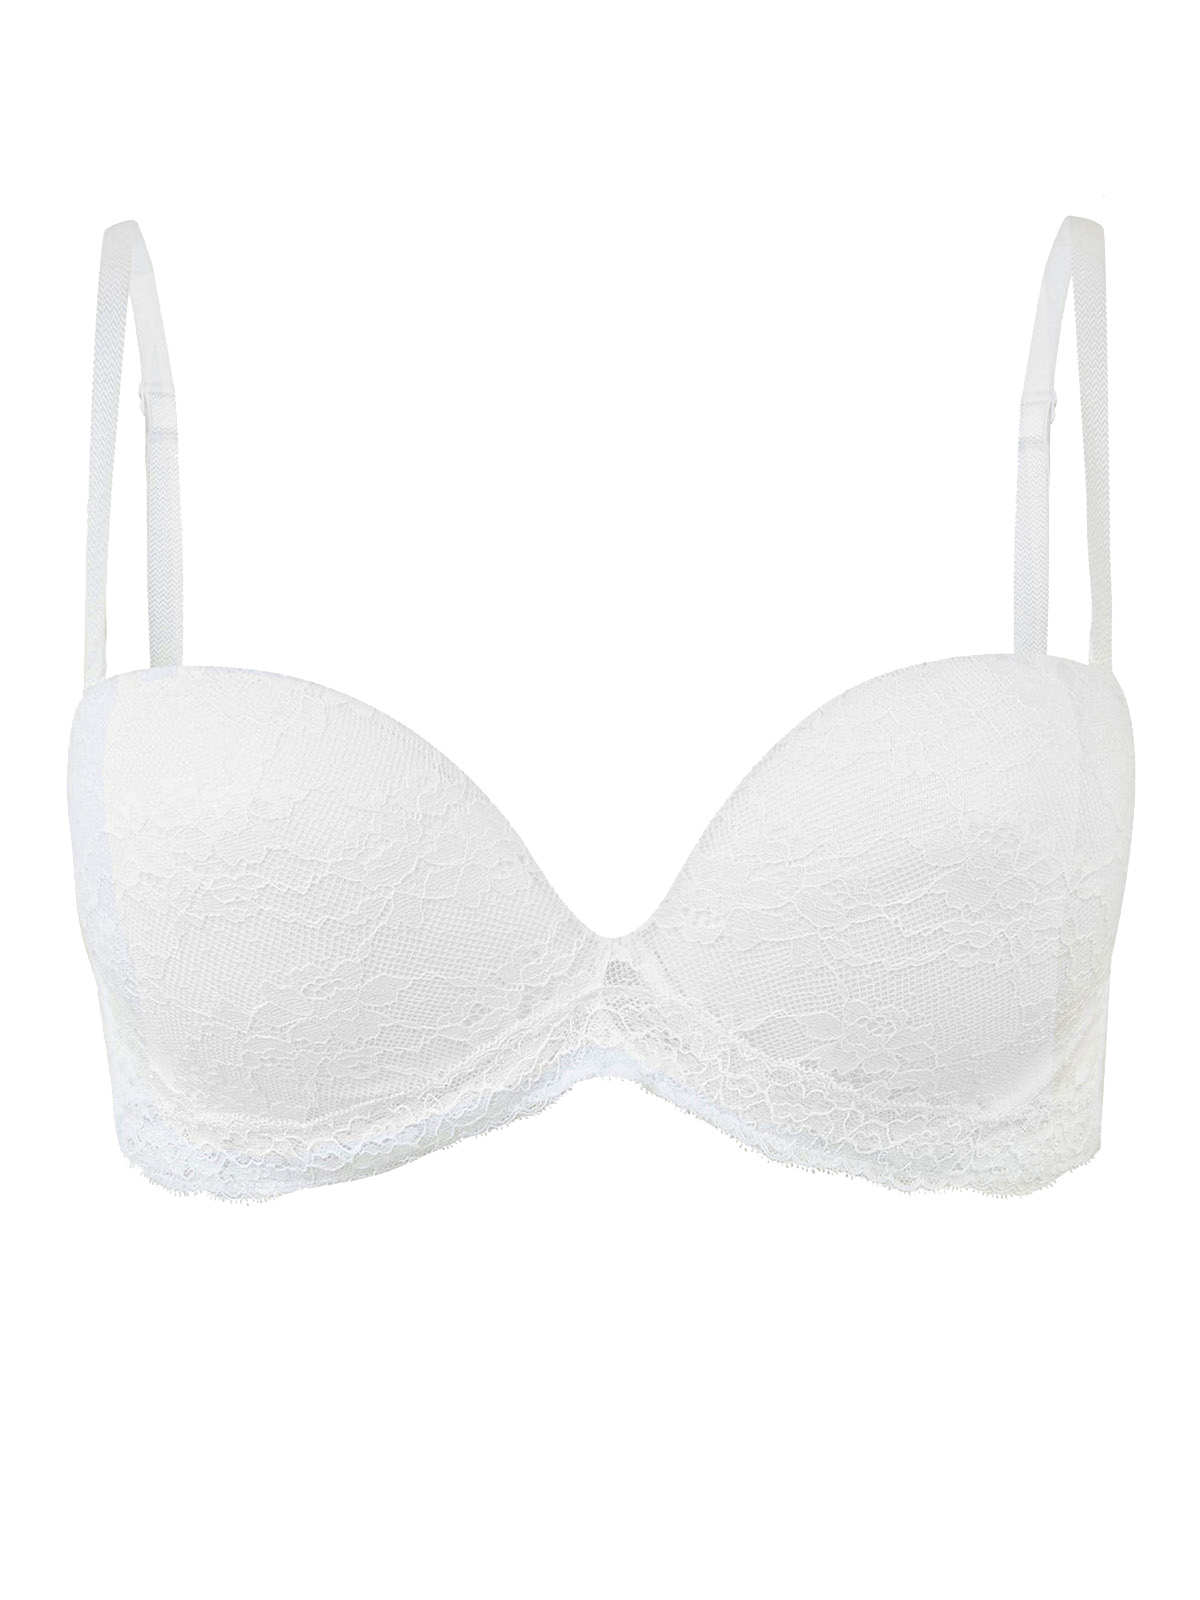 Marks and Spencer - - M&5 WHITE Louisa Lace Plunge Strapless Bra - Size ...